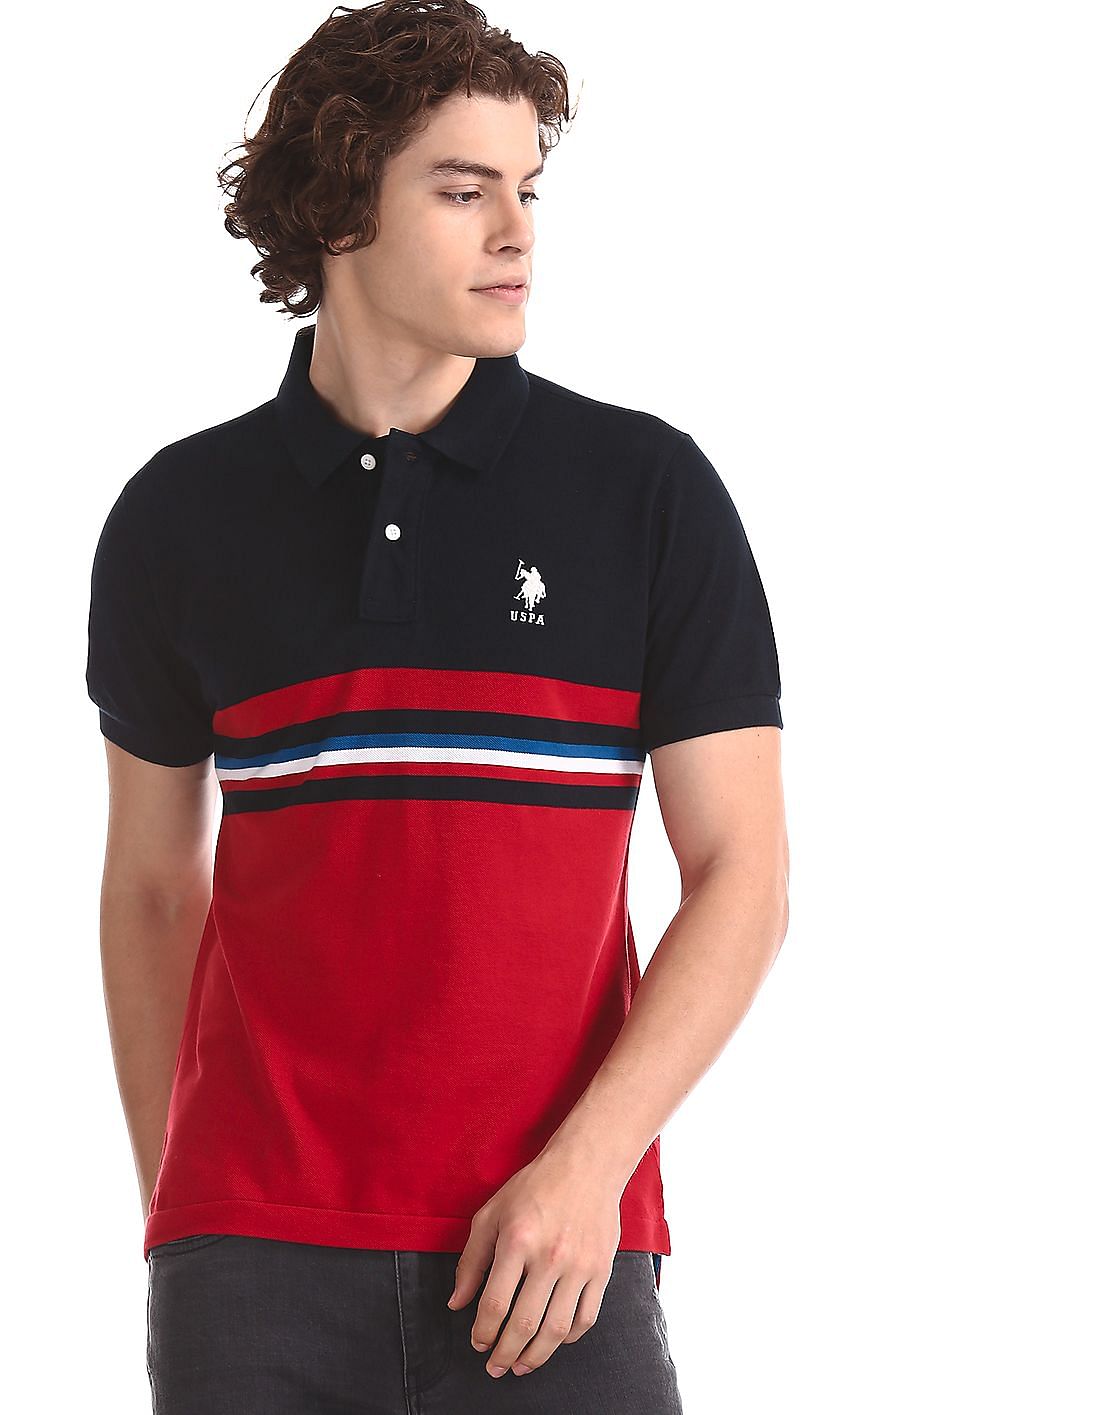 red color polo t shirt